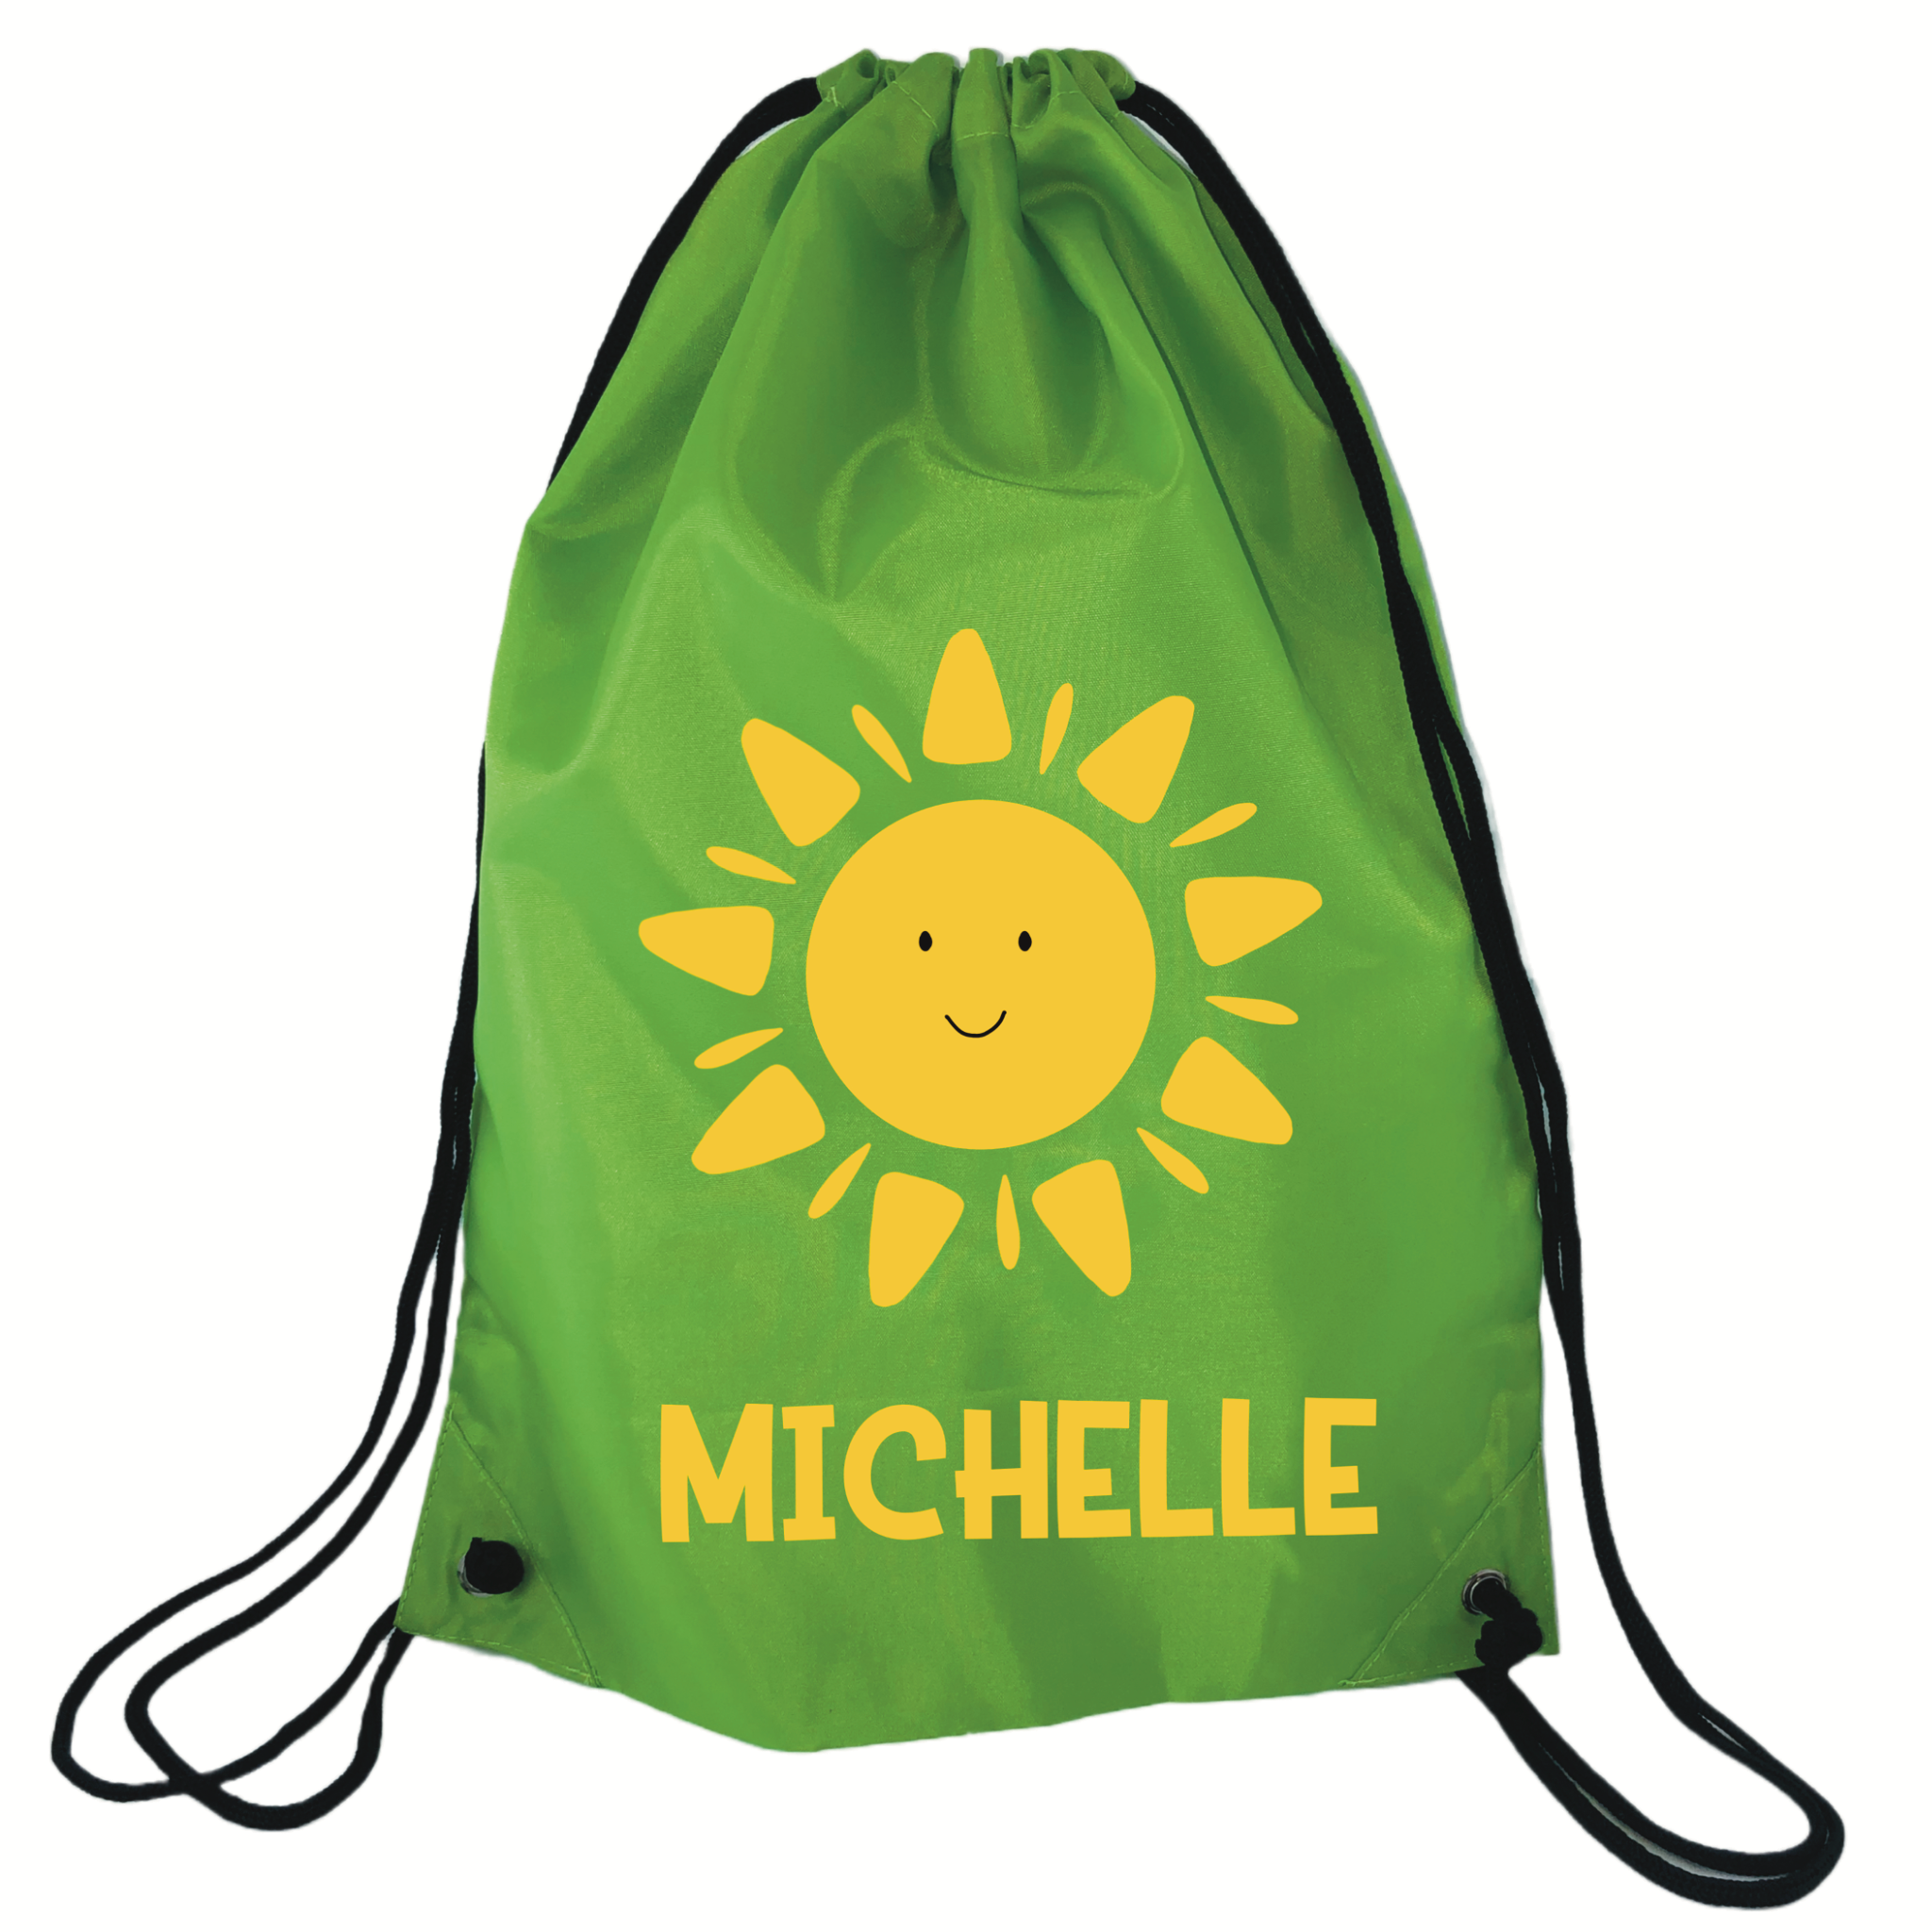 Swim Bags for Cool Kids. NZ Made Personalised Drawstring Bags